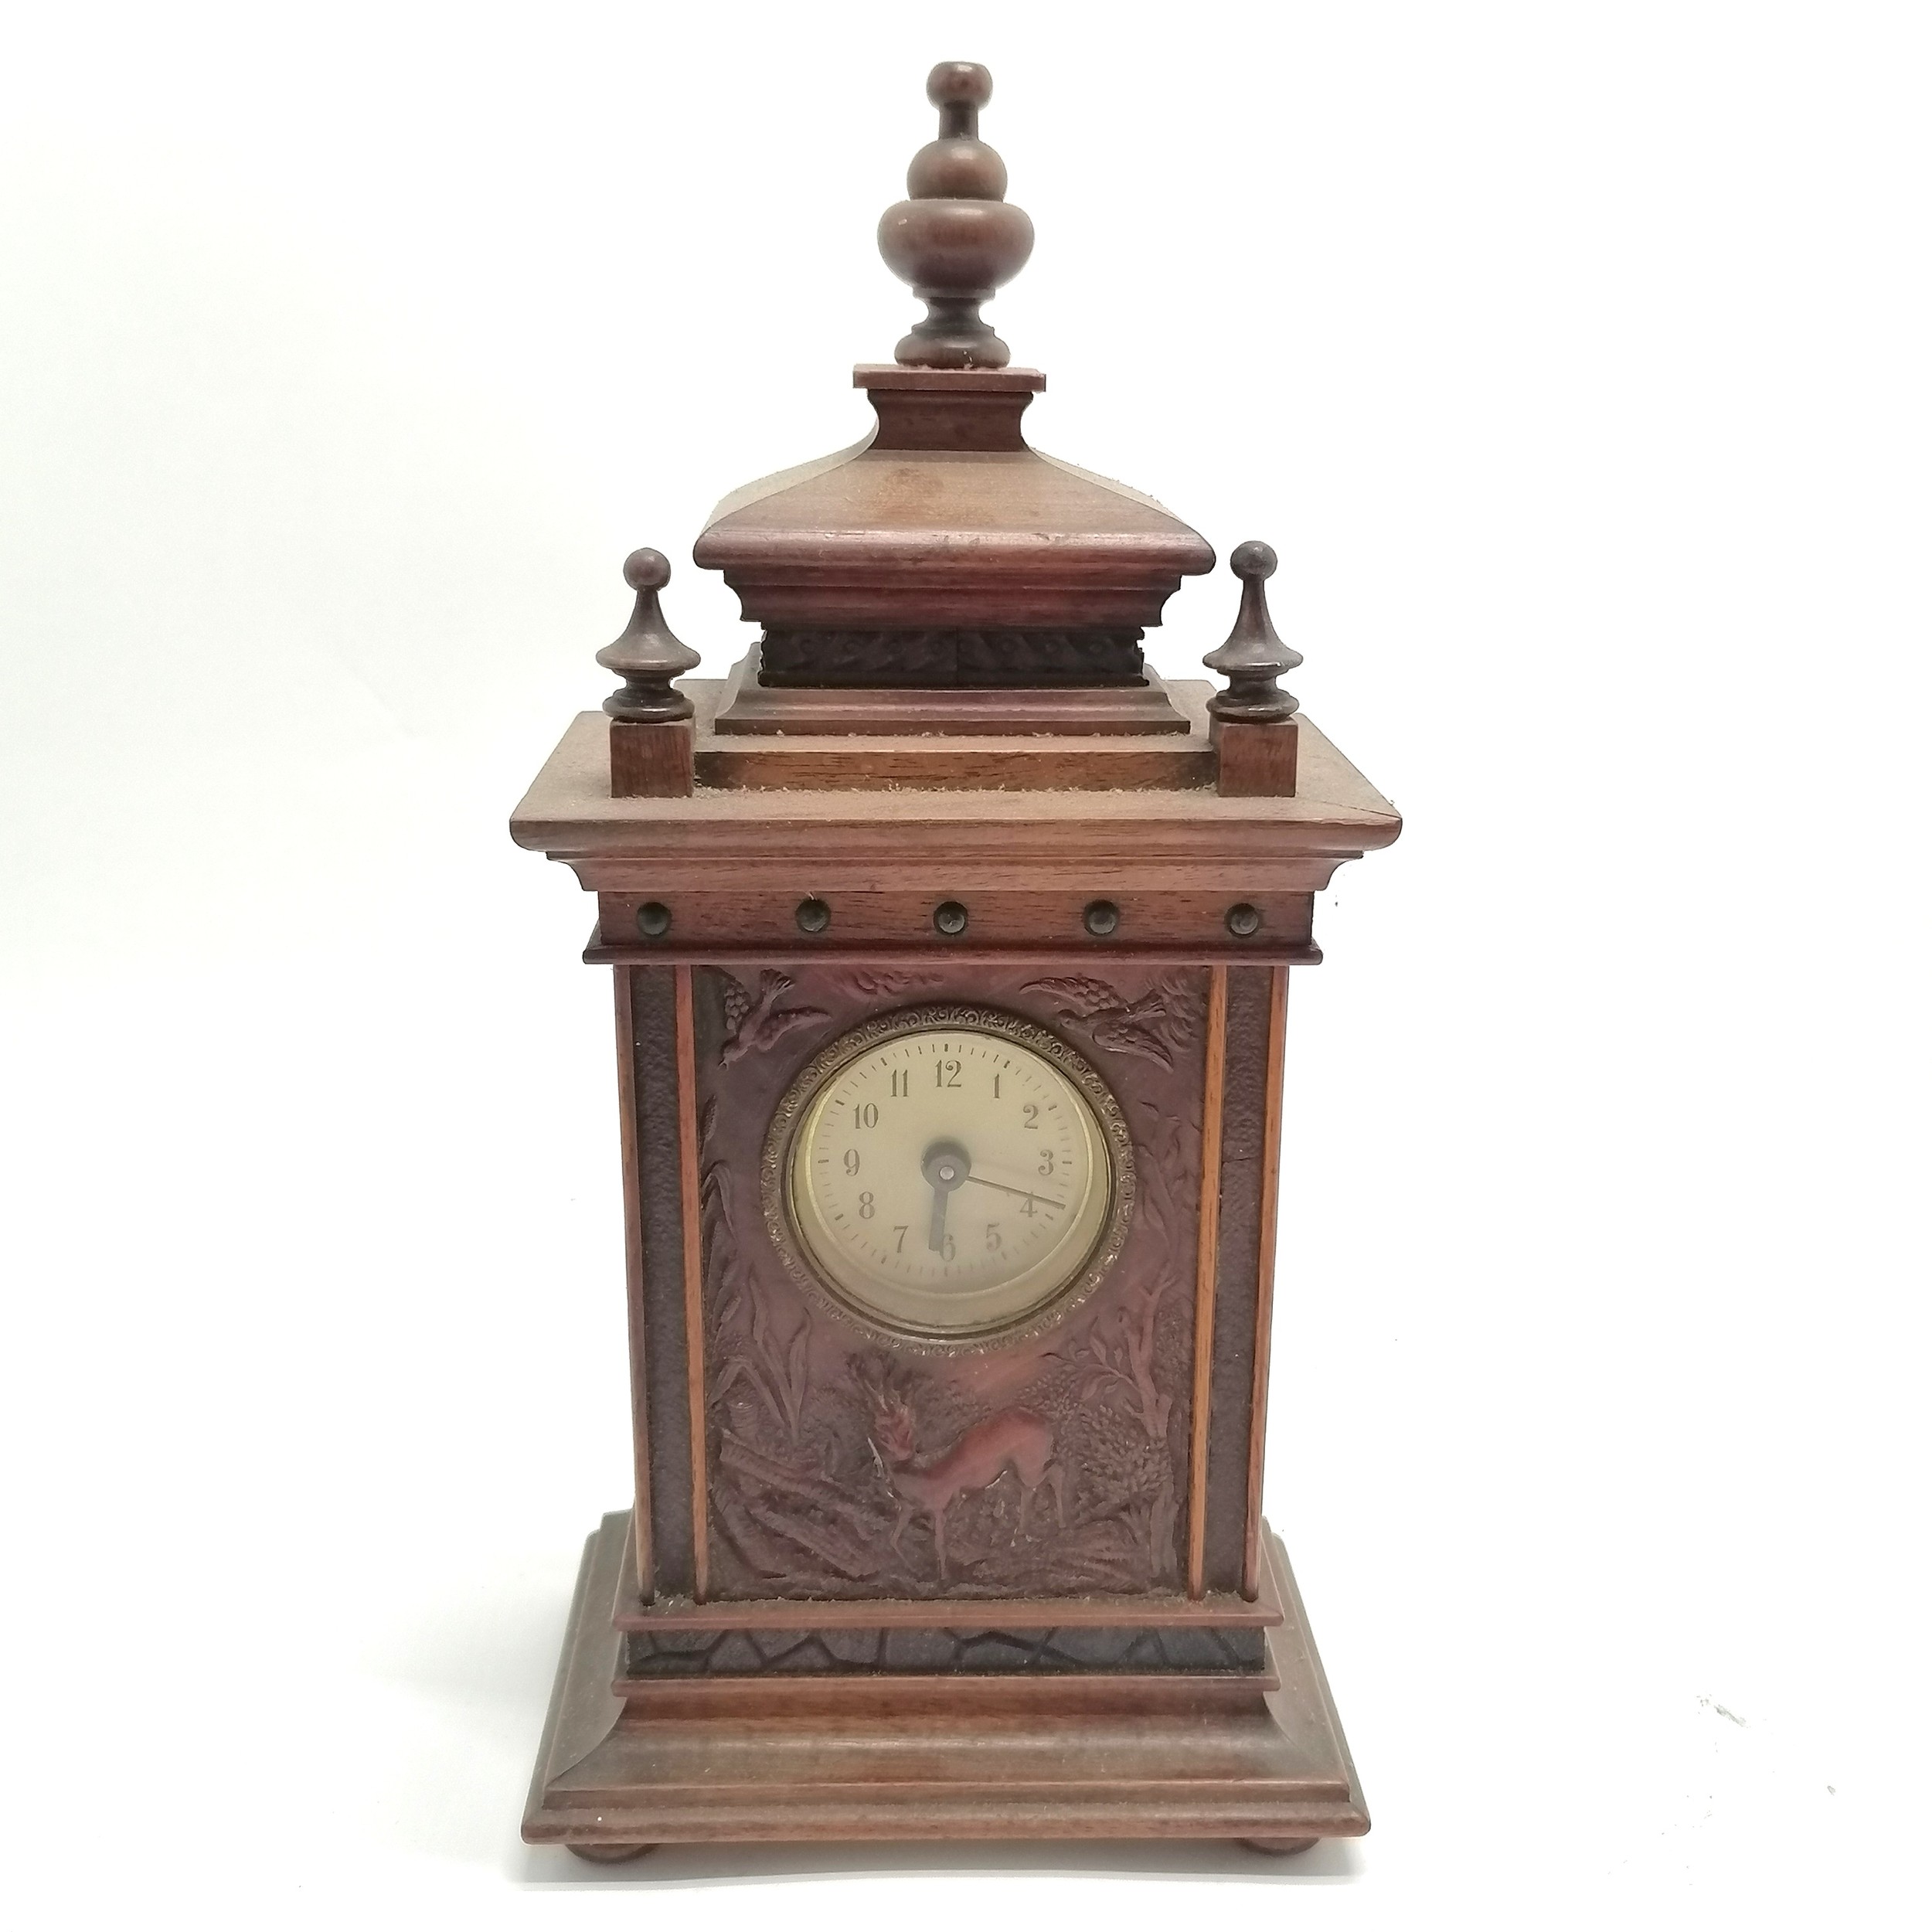 Black forest hand carved wooden clock with front panel decorated with deer & birds - 29cm high x